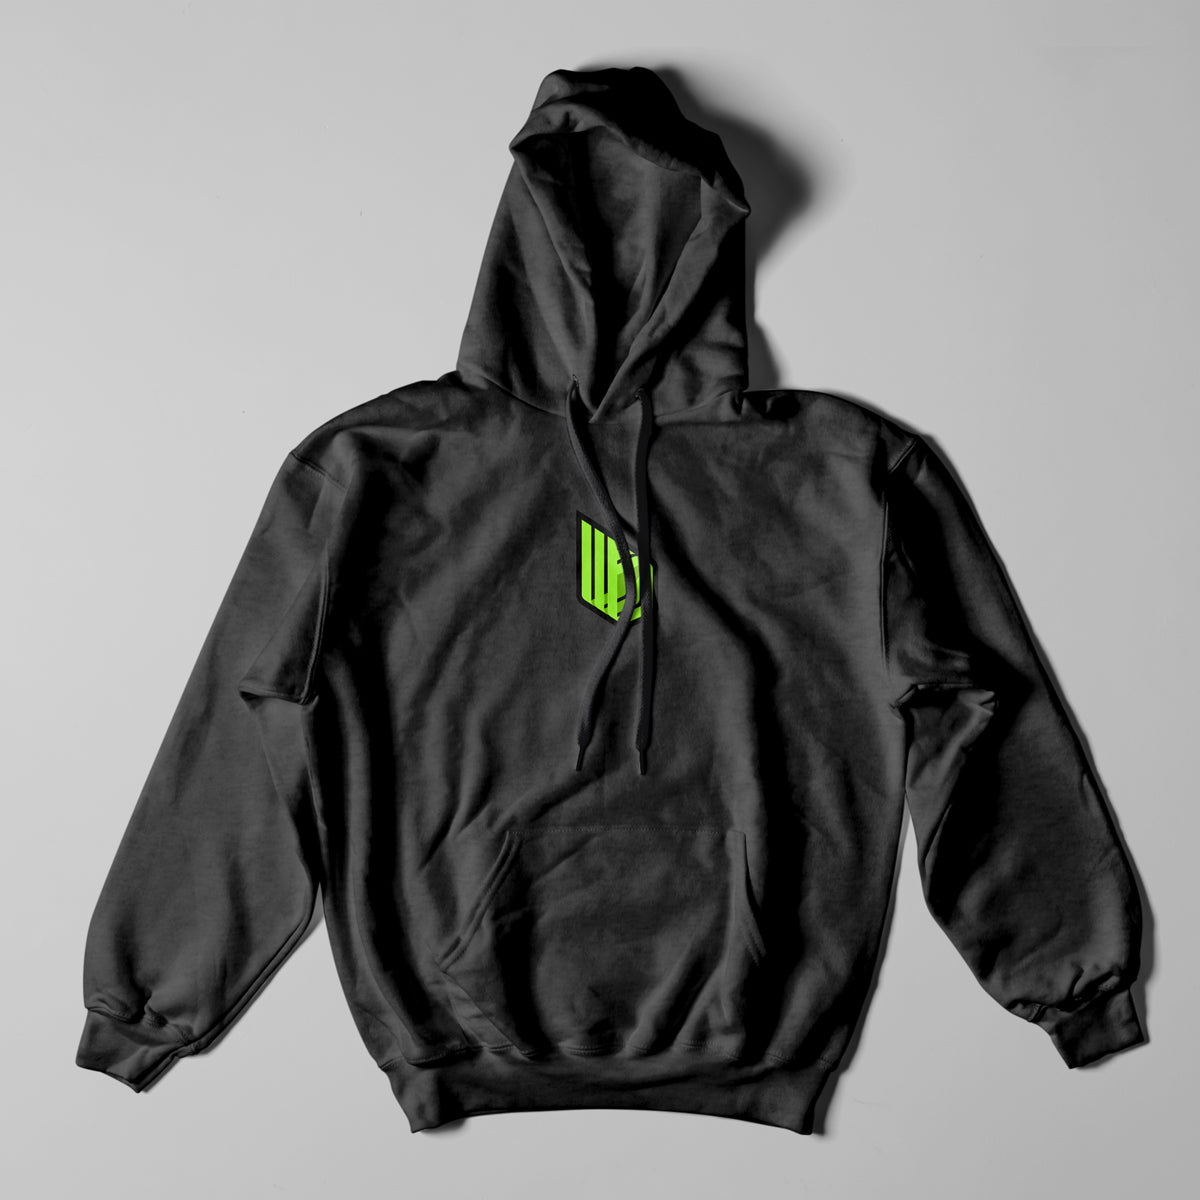 BBB - Survival Brian heavyweight pullover hoodie